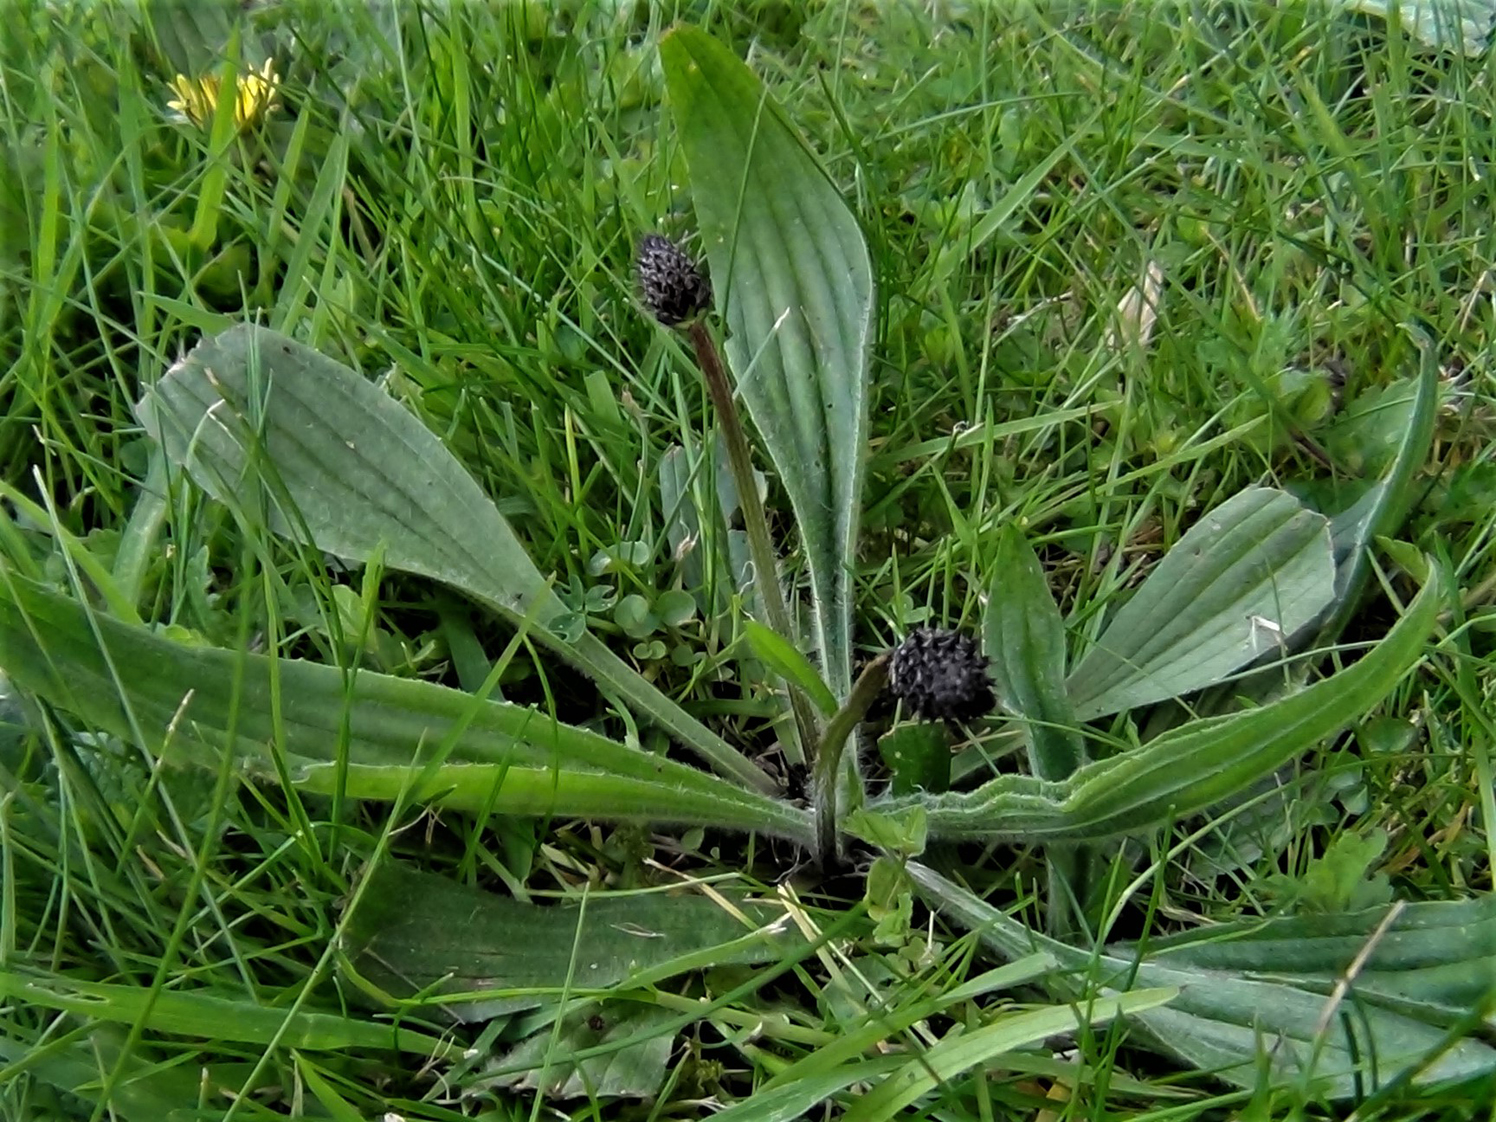 Image of Narrow leaf plantain leaves in meadow